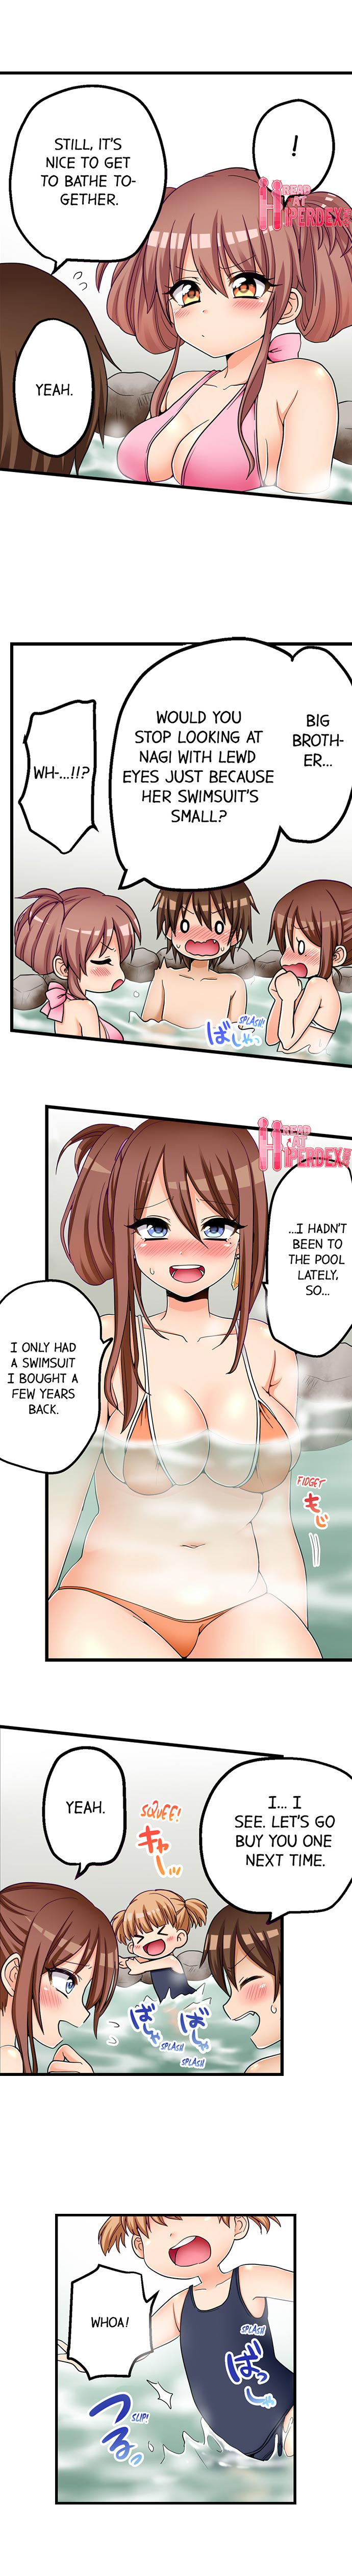 Taking a Hot Tanned Chick’s Virginity - Chapter 16 Page 6